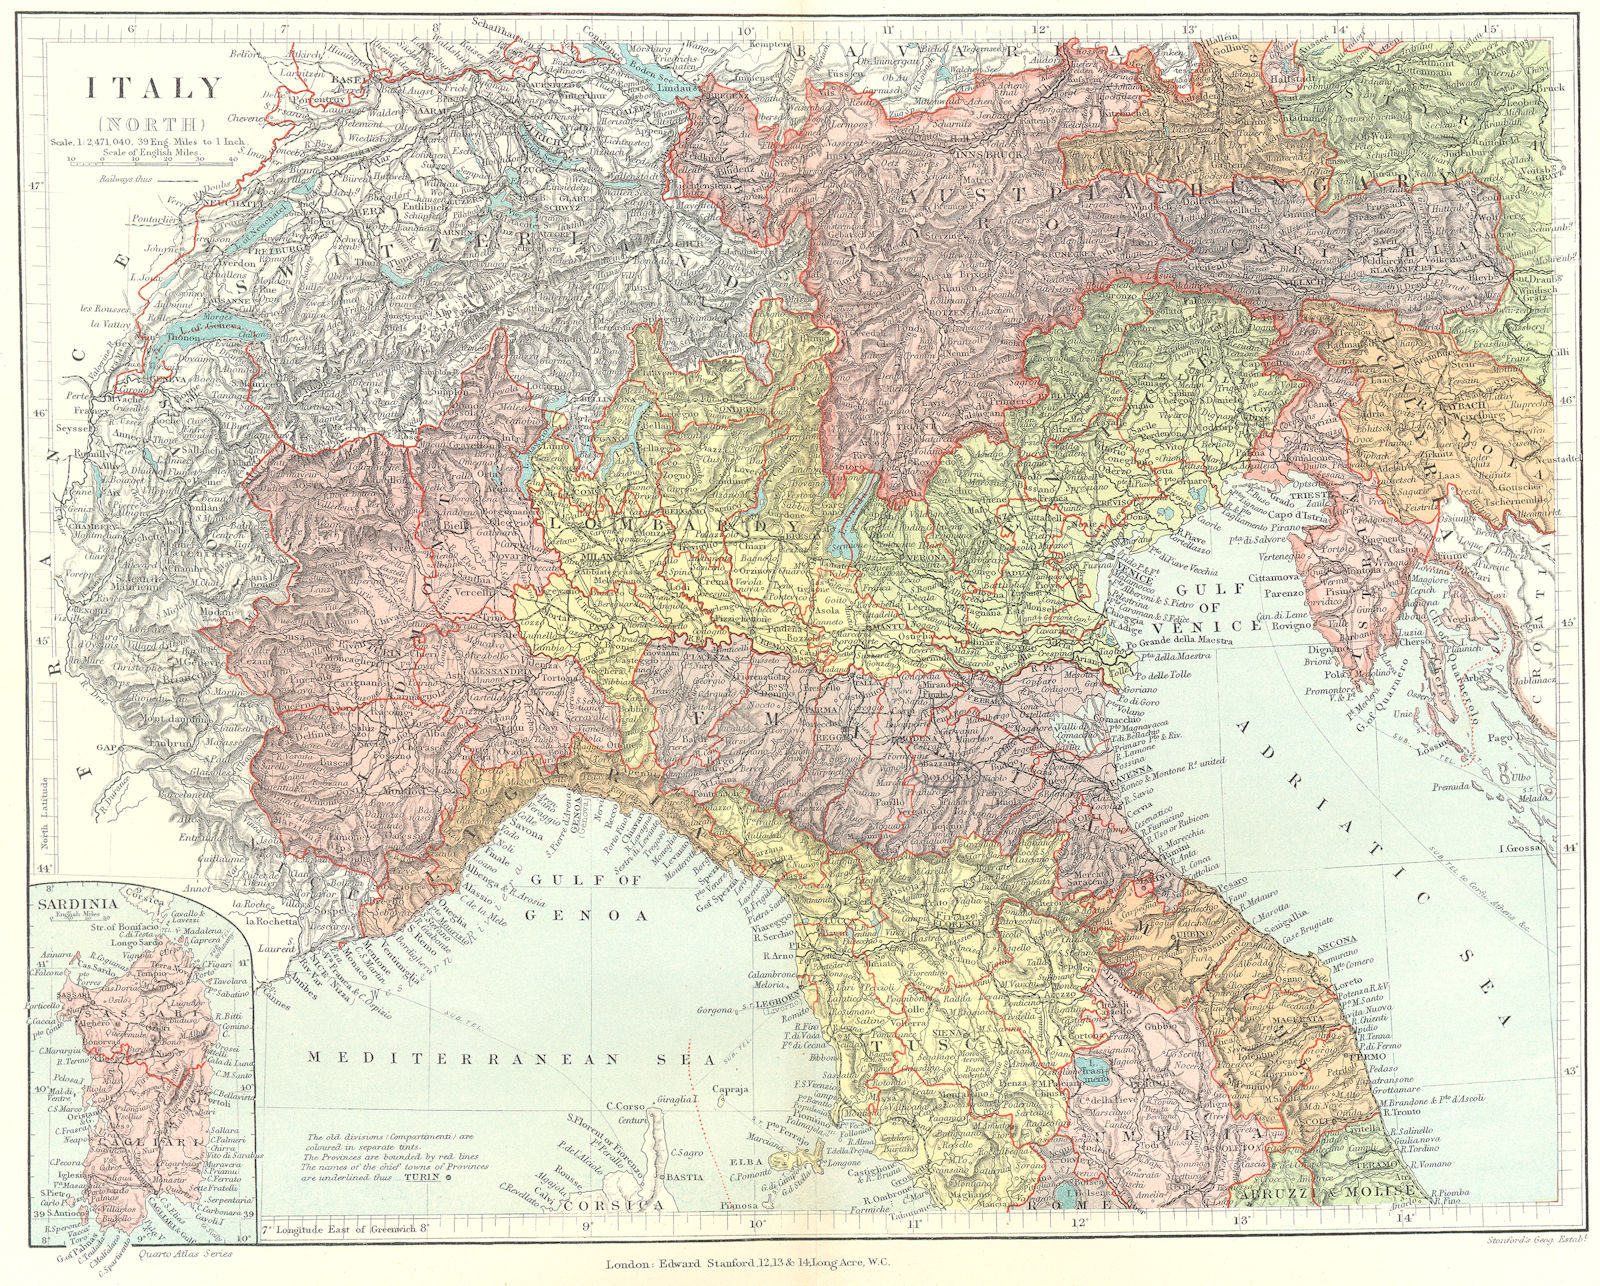 NORTHERN ITALY. Showing provinces and compartmenti. STANFORD 1906 old map